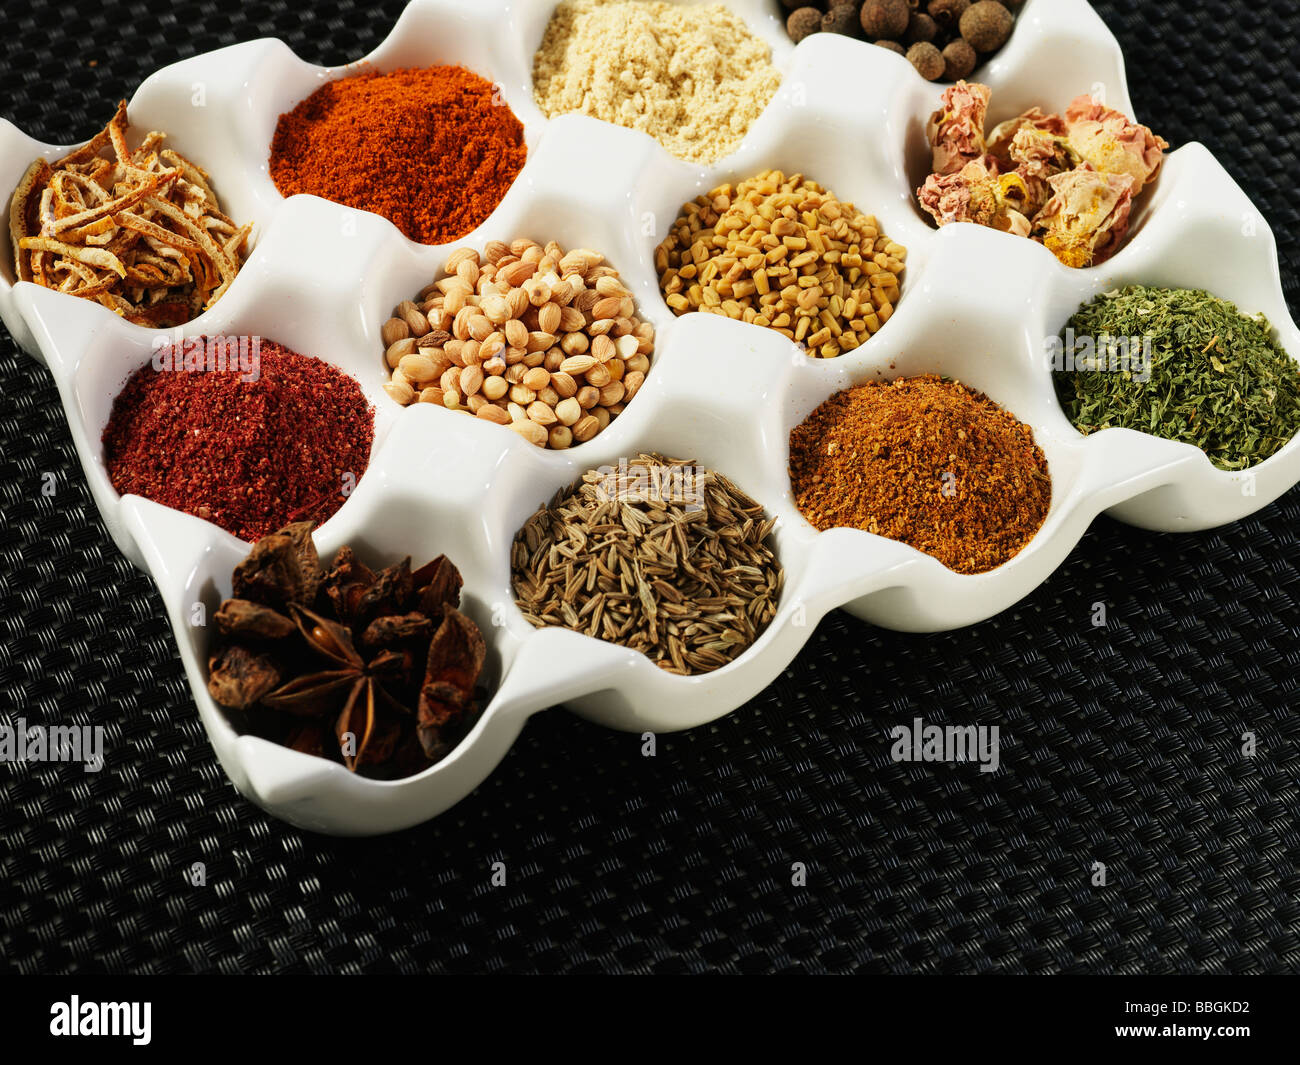 A white pallette of many different spices and seasonings used for cooking shot against a black textured background Stock Photo